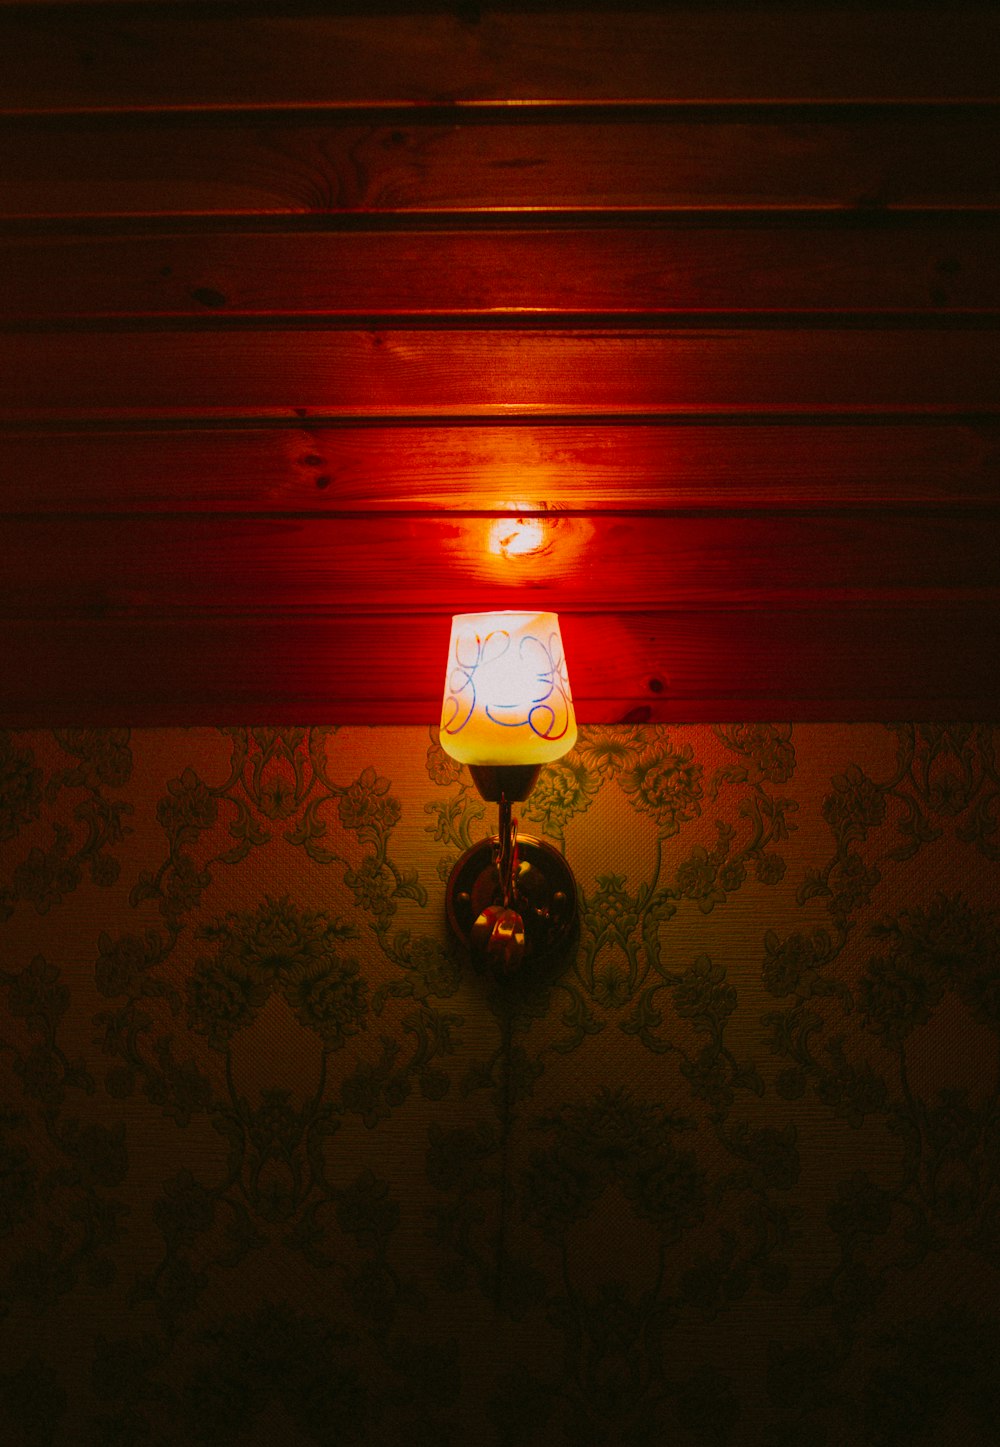 a lamp that is on a wall in a room